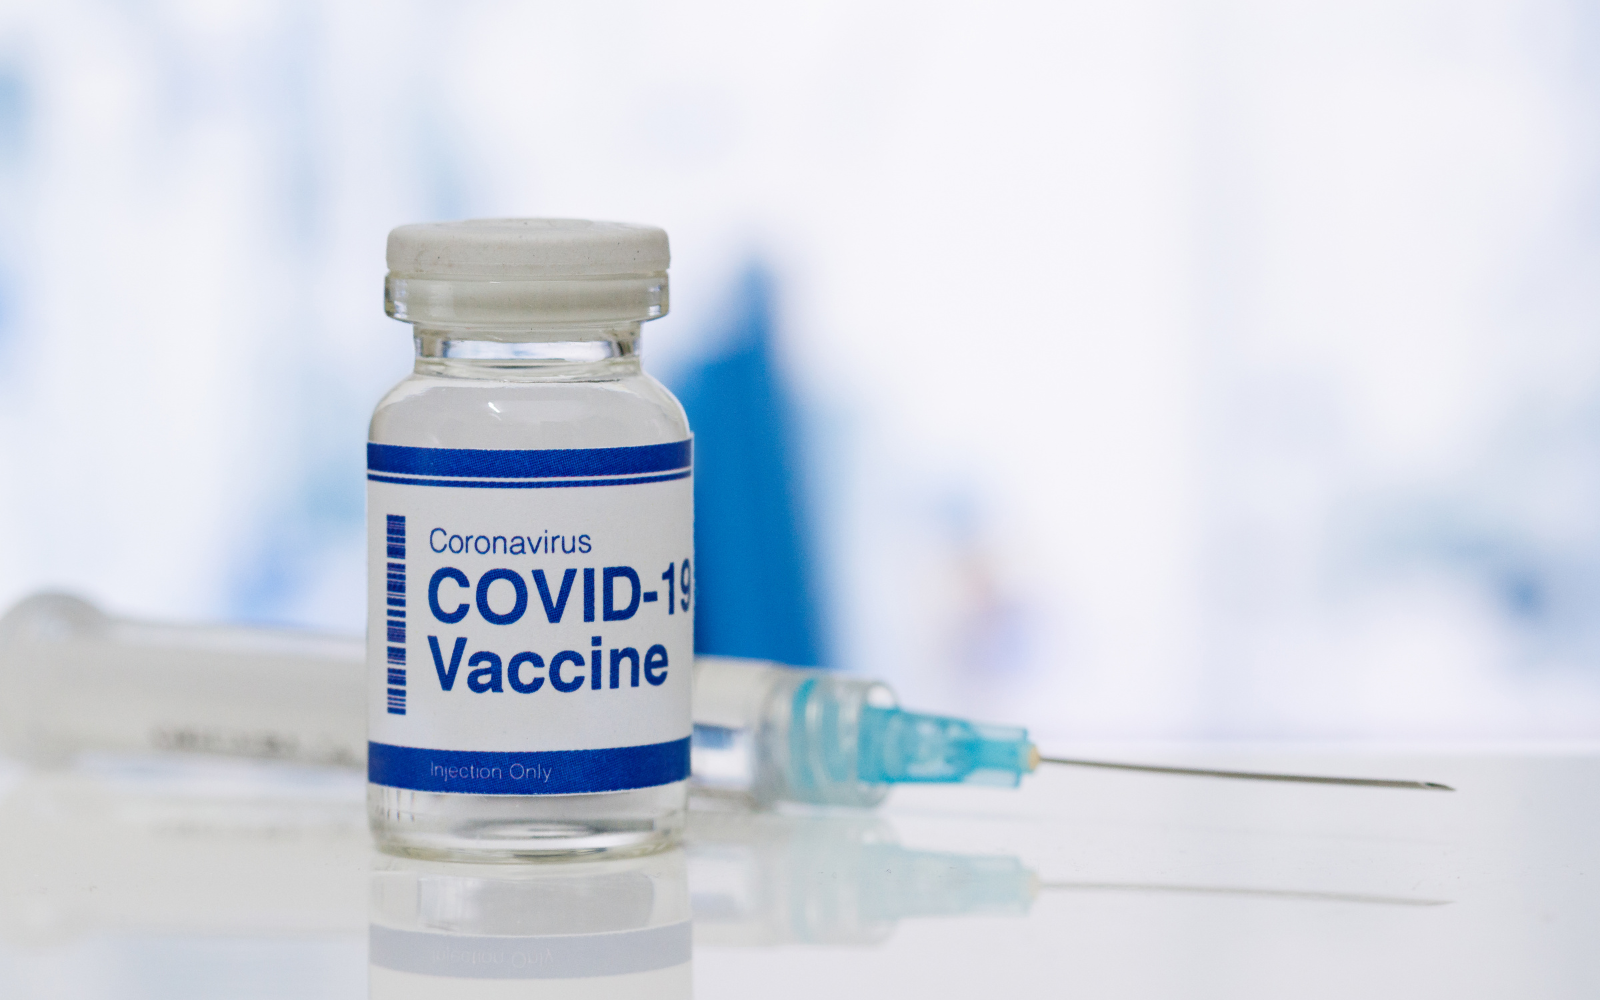 covid-19 vaccine in a bottle with a syringe behind it. Coronavirus COVID-19 Vaccine in a lab.